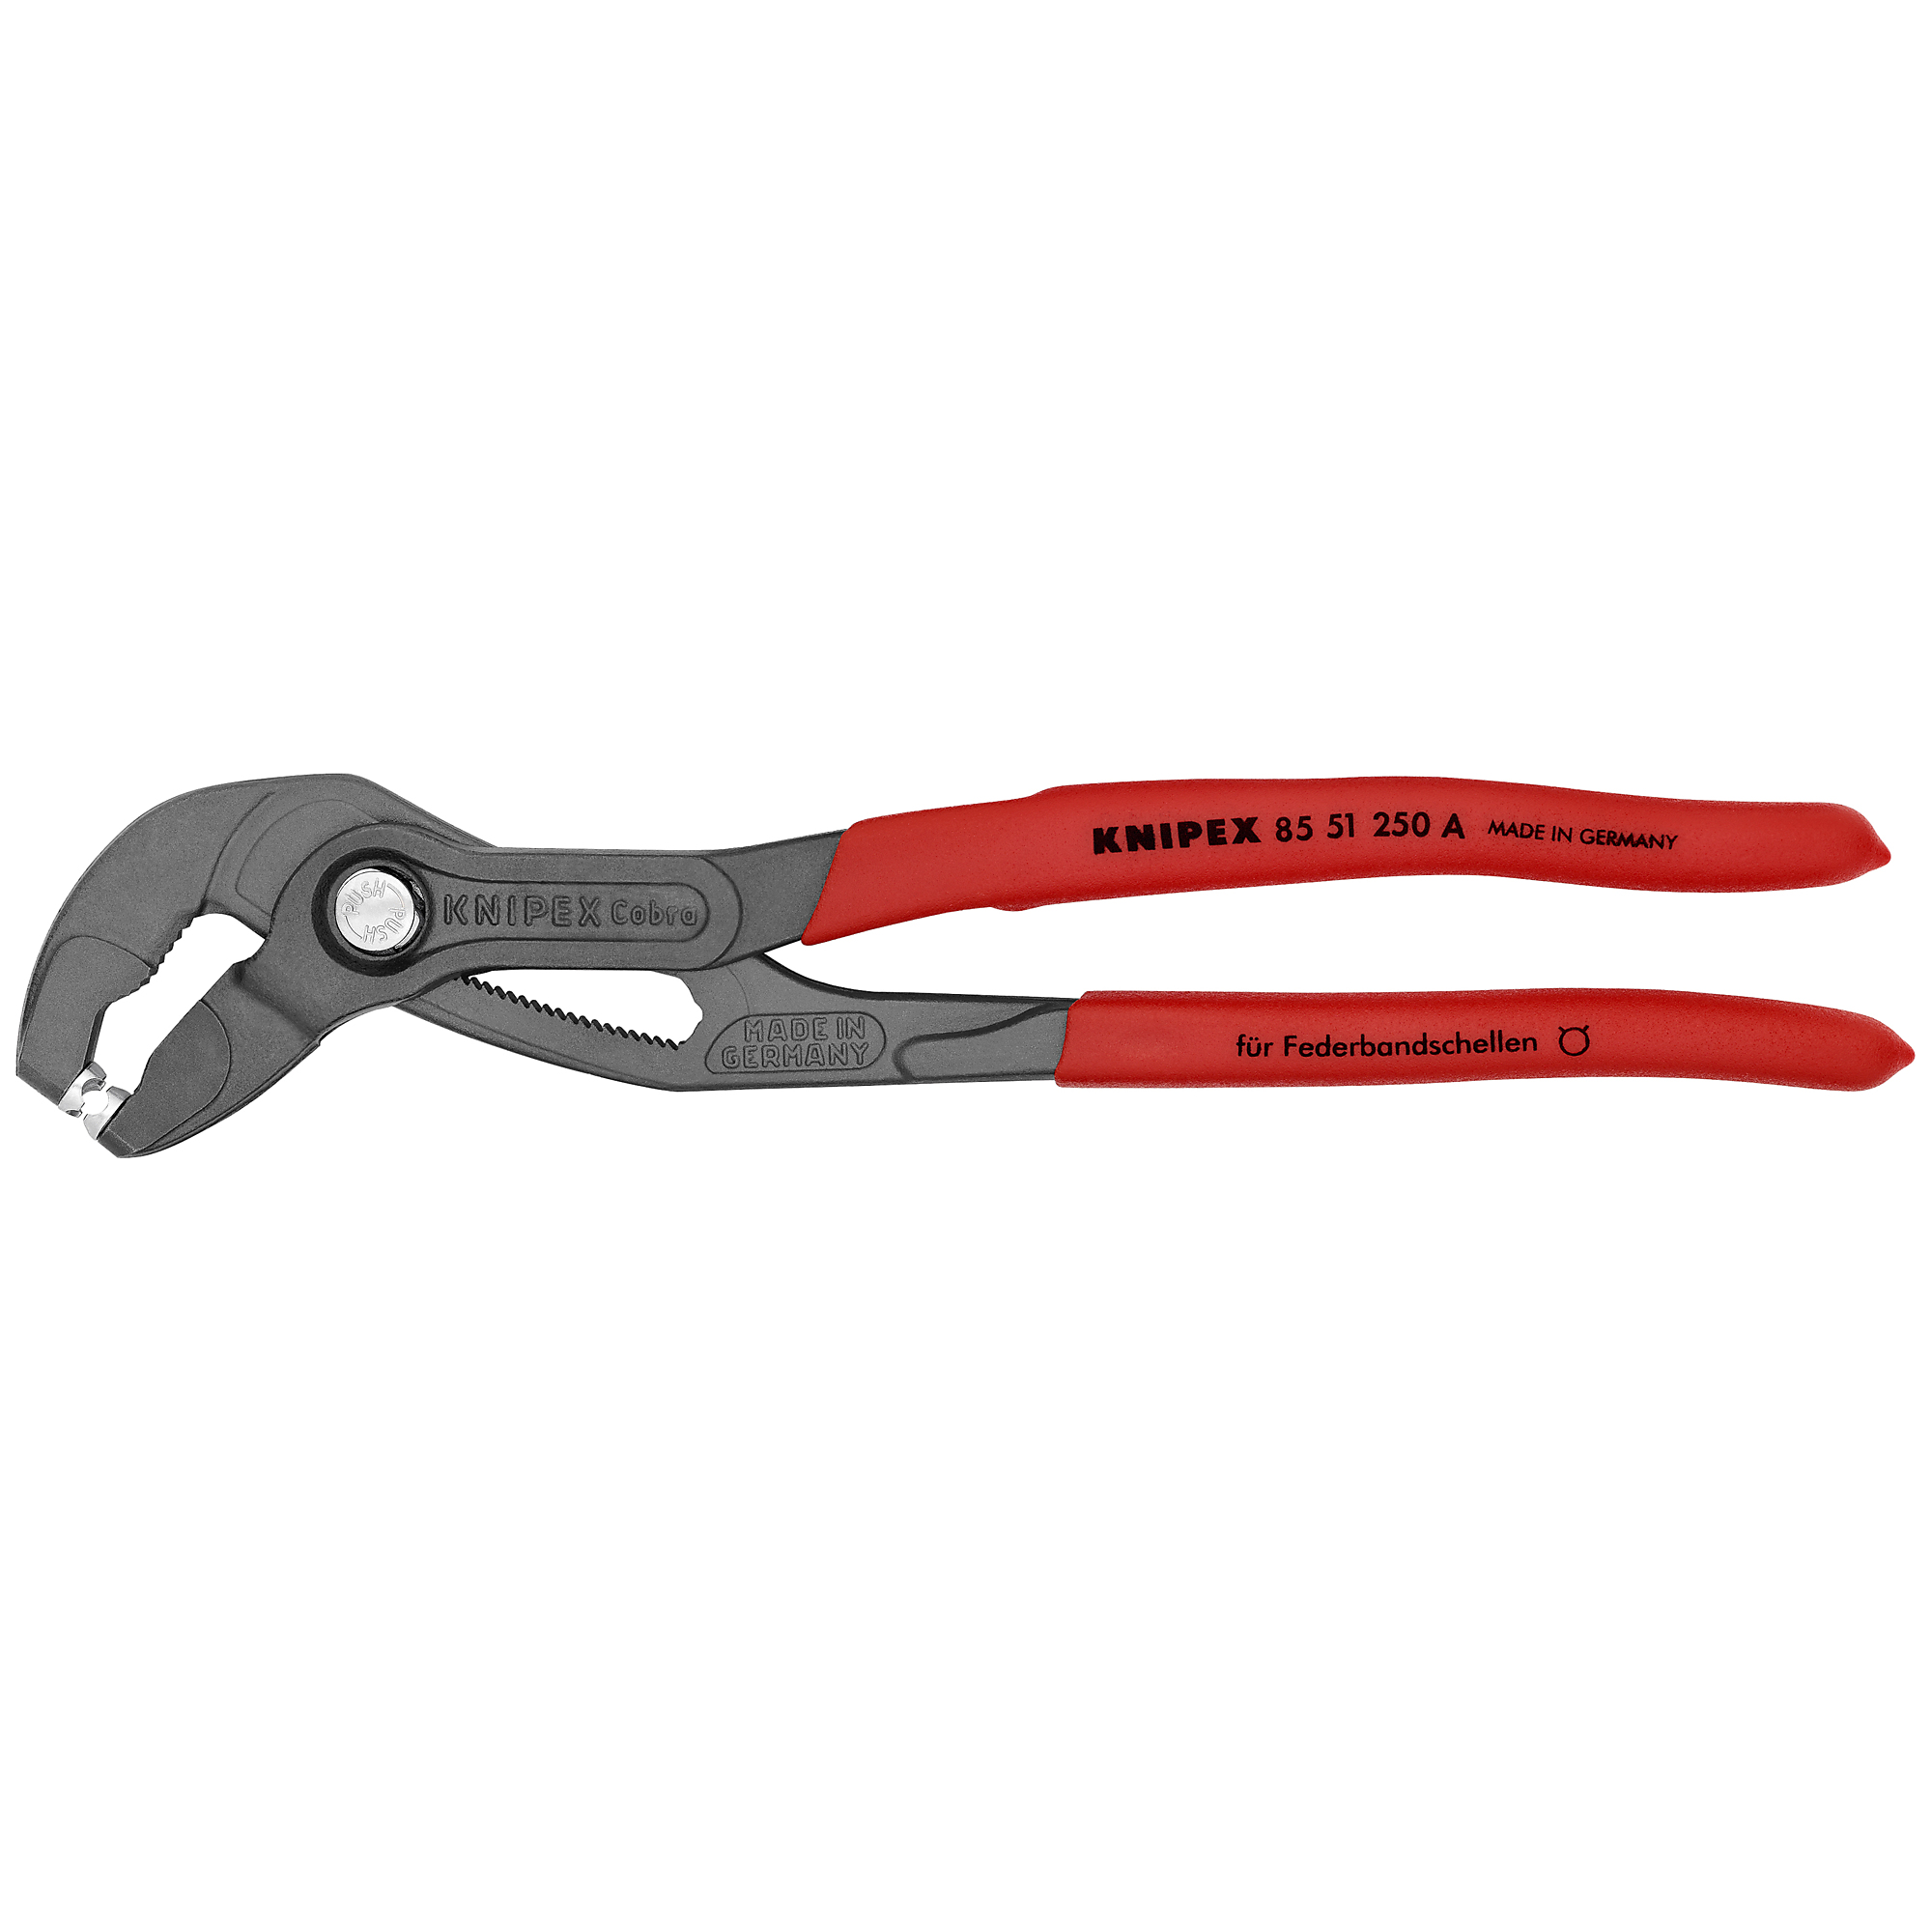 KNIPEX, Spring Hose Clamp Pliers, Bulk, 10Inch, Pieces (qty.) 1 Material Steel, Jaw Capacity 2.75 in, Model 85 51 250 A